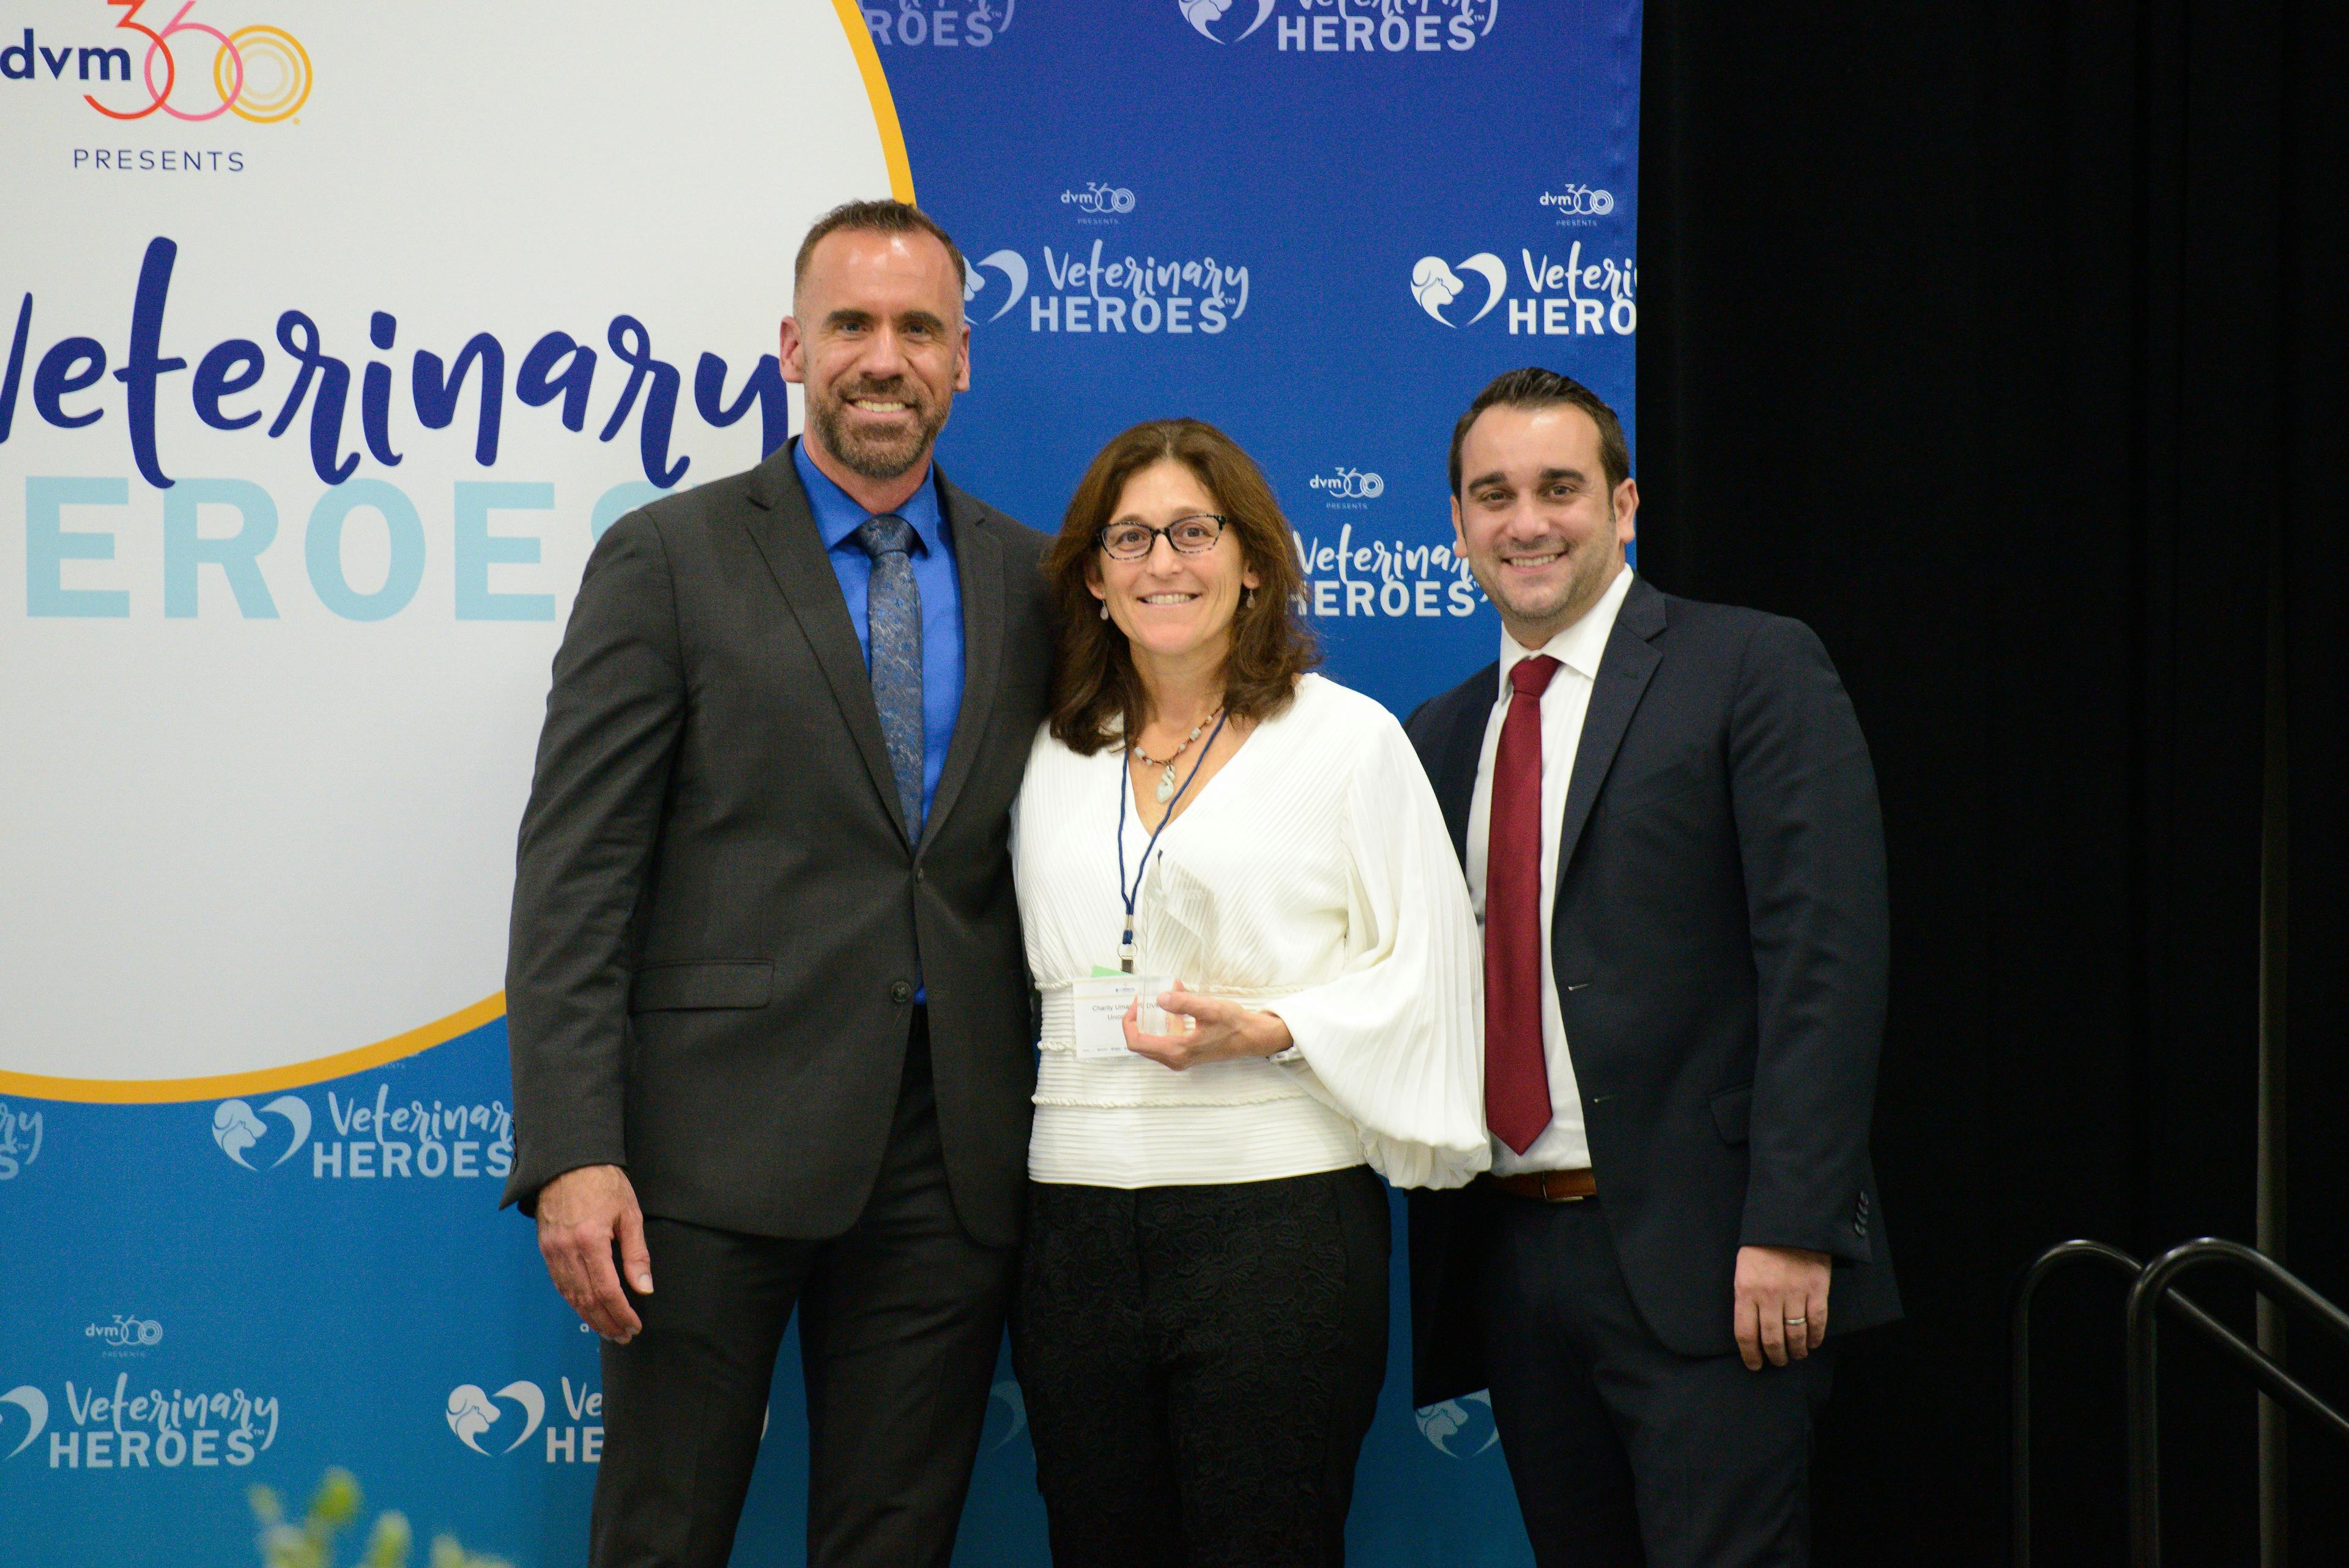 Photo: Jeeheon Cho Photography

Charity J. Uman, MS, DVM (center), receives the Veterinary HeroesTM award for Emergency Medicine from (left) Adam Christman, DVM, MBA, chief veterinary officer for dvm360®, and John Hydrusko, vice president, MultiMedia Animal Care LLC at MJH Life SciencesTM.  